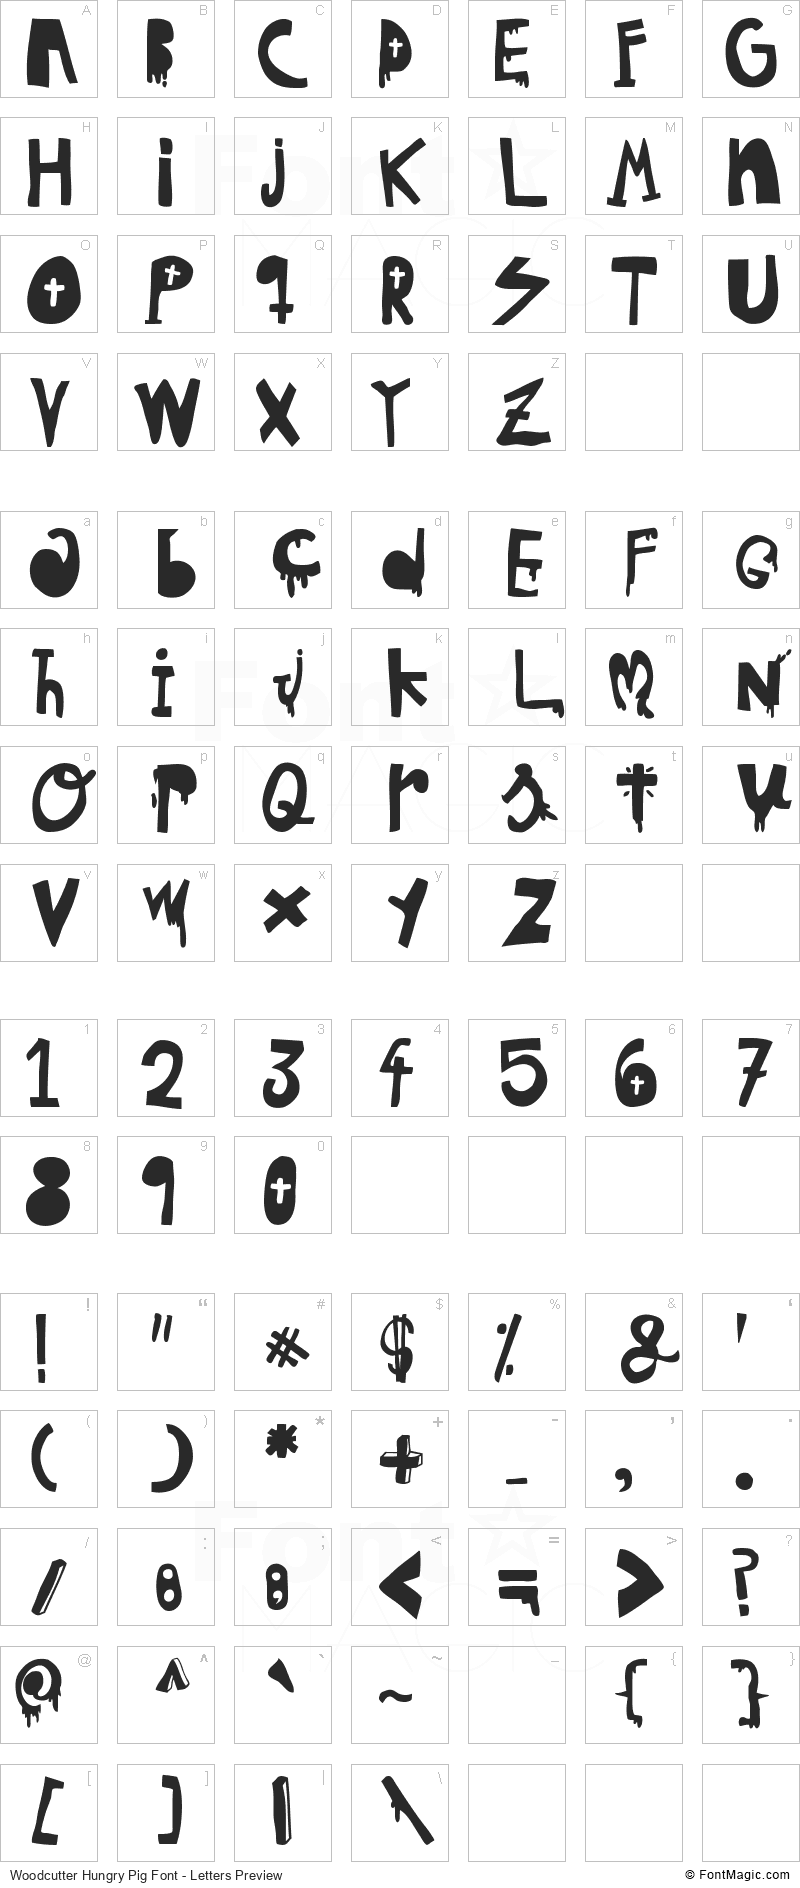 Woodcutter Hungry Pig Font - All Latters Preview Chart